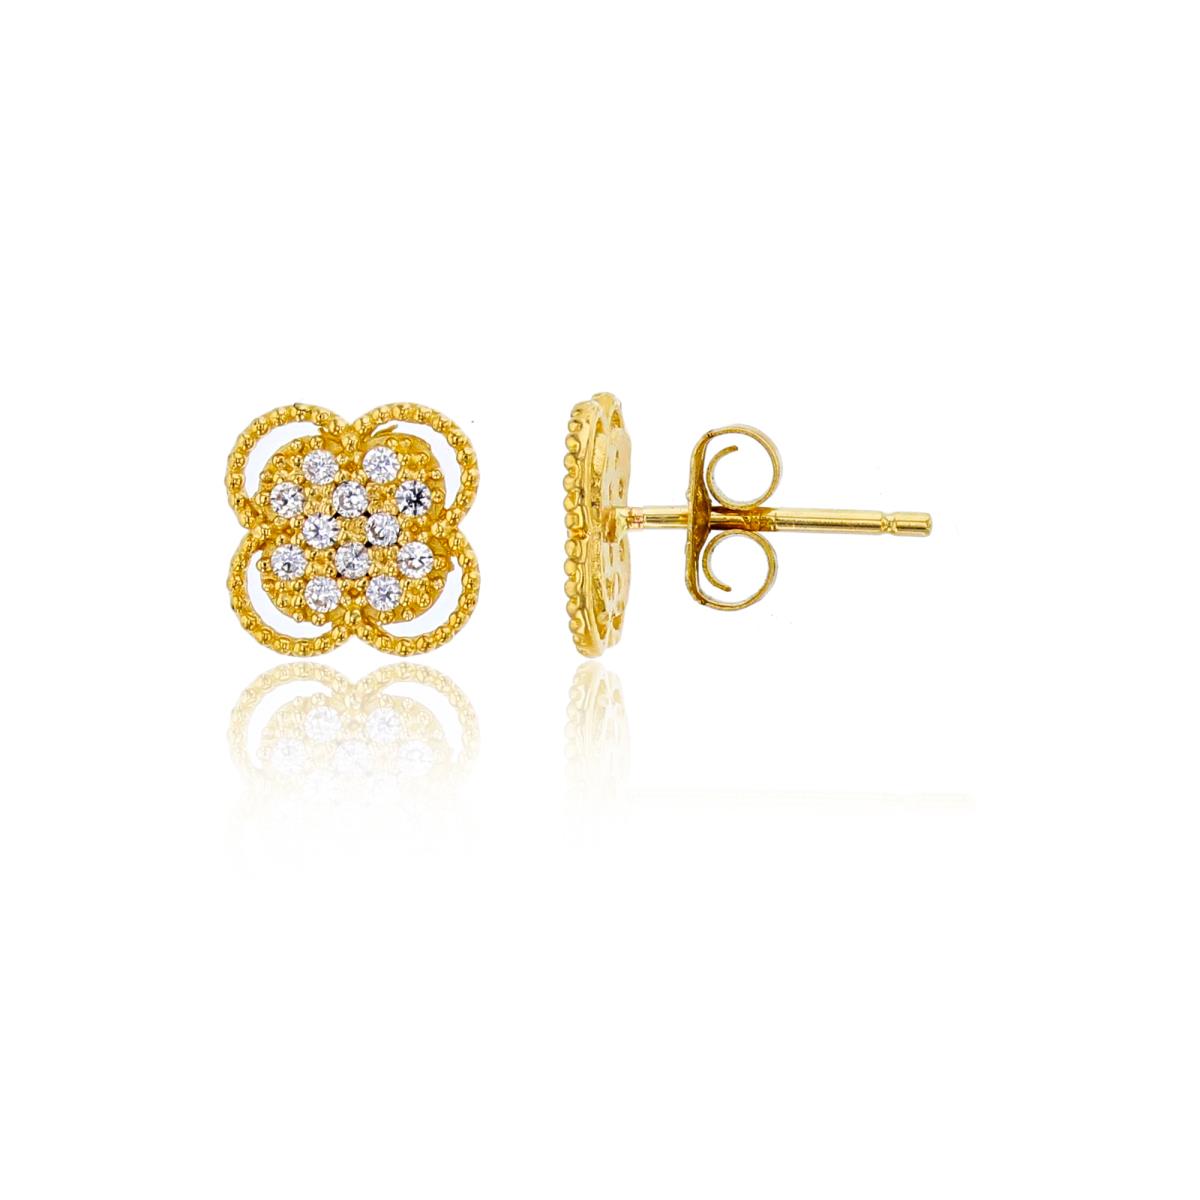 14K Yellow Gold Rnd CZ Micropave Milgrain Flower Studs with 4.5mm Clutch